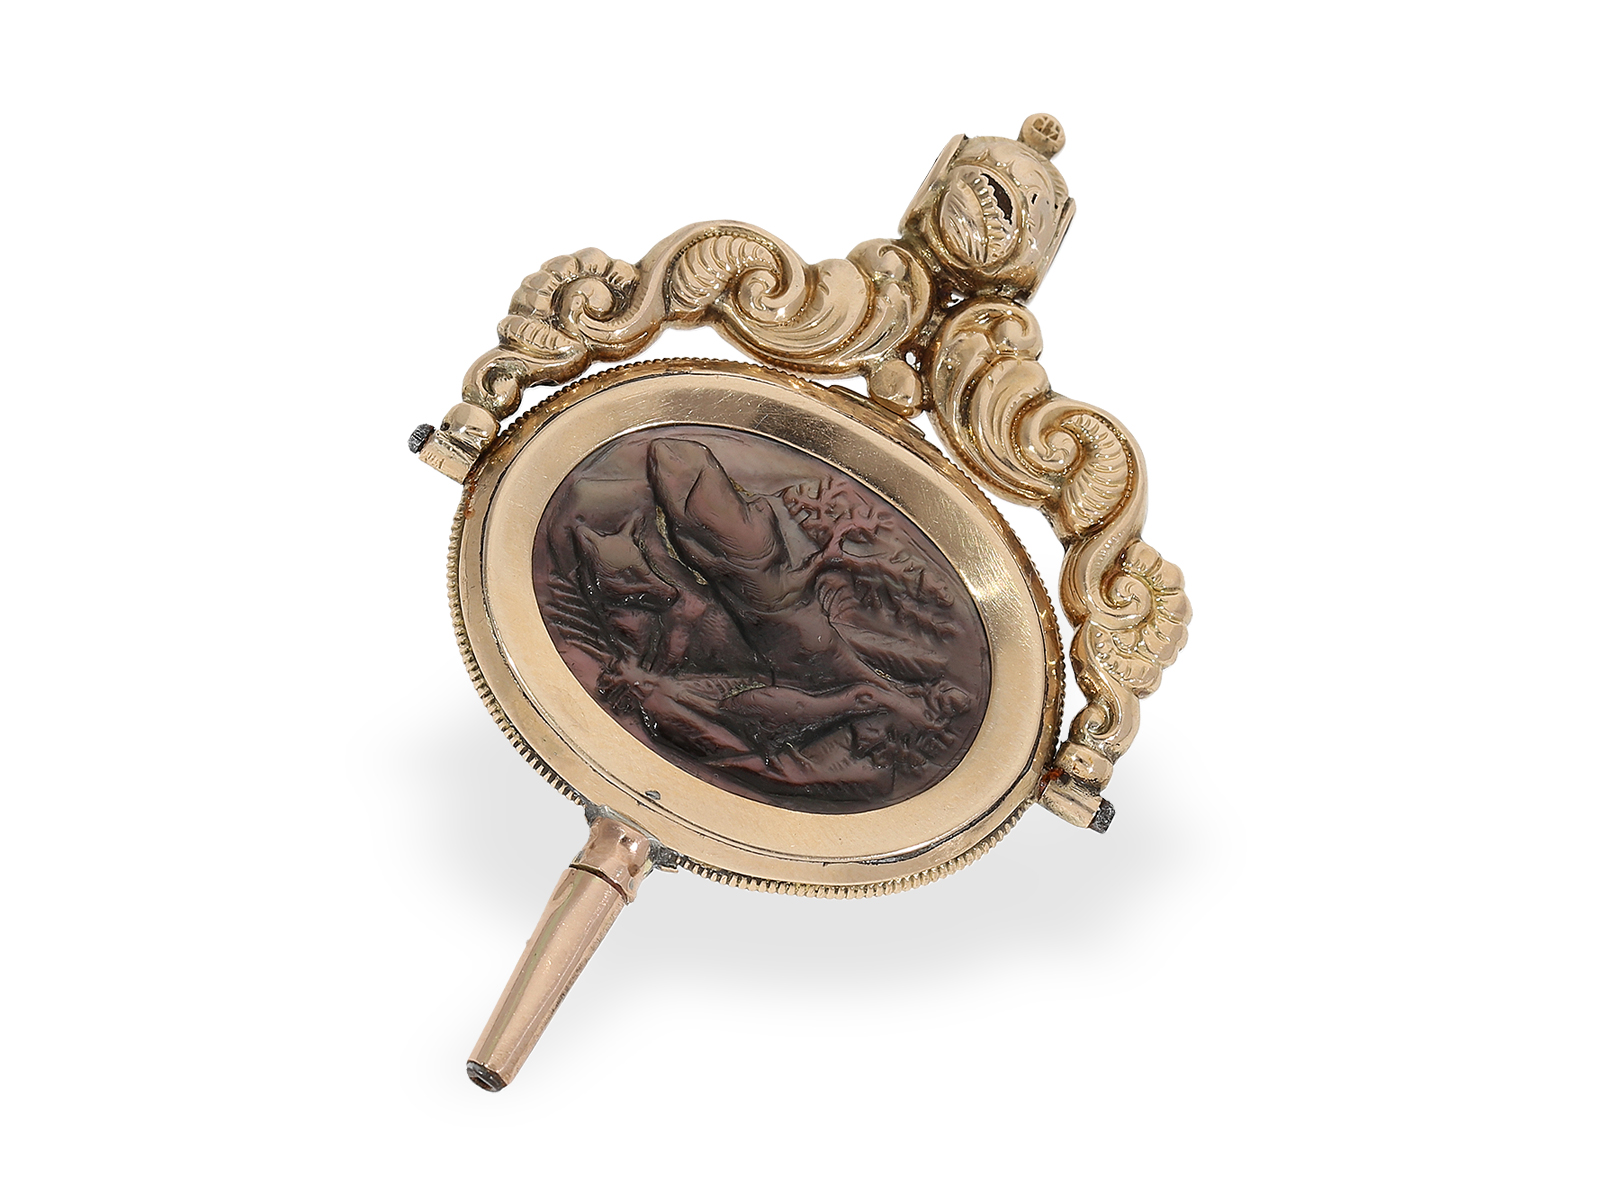 Watch key: extremely rare gold key with double-sided mother-of-pearl cameo, ca. 1820